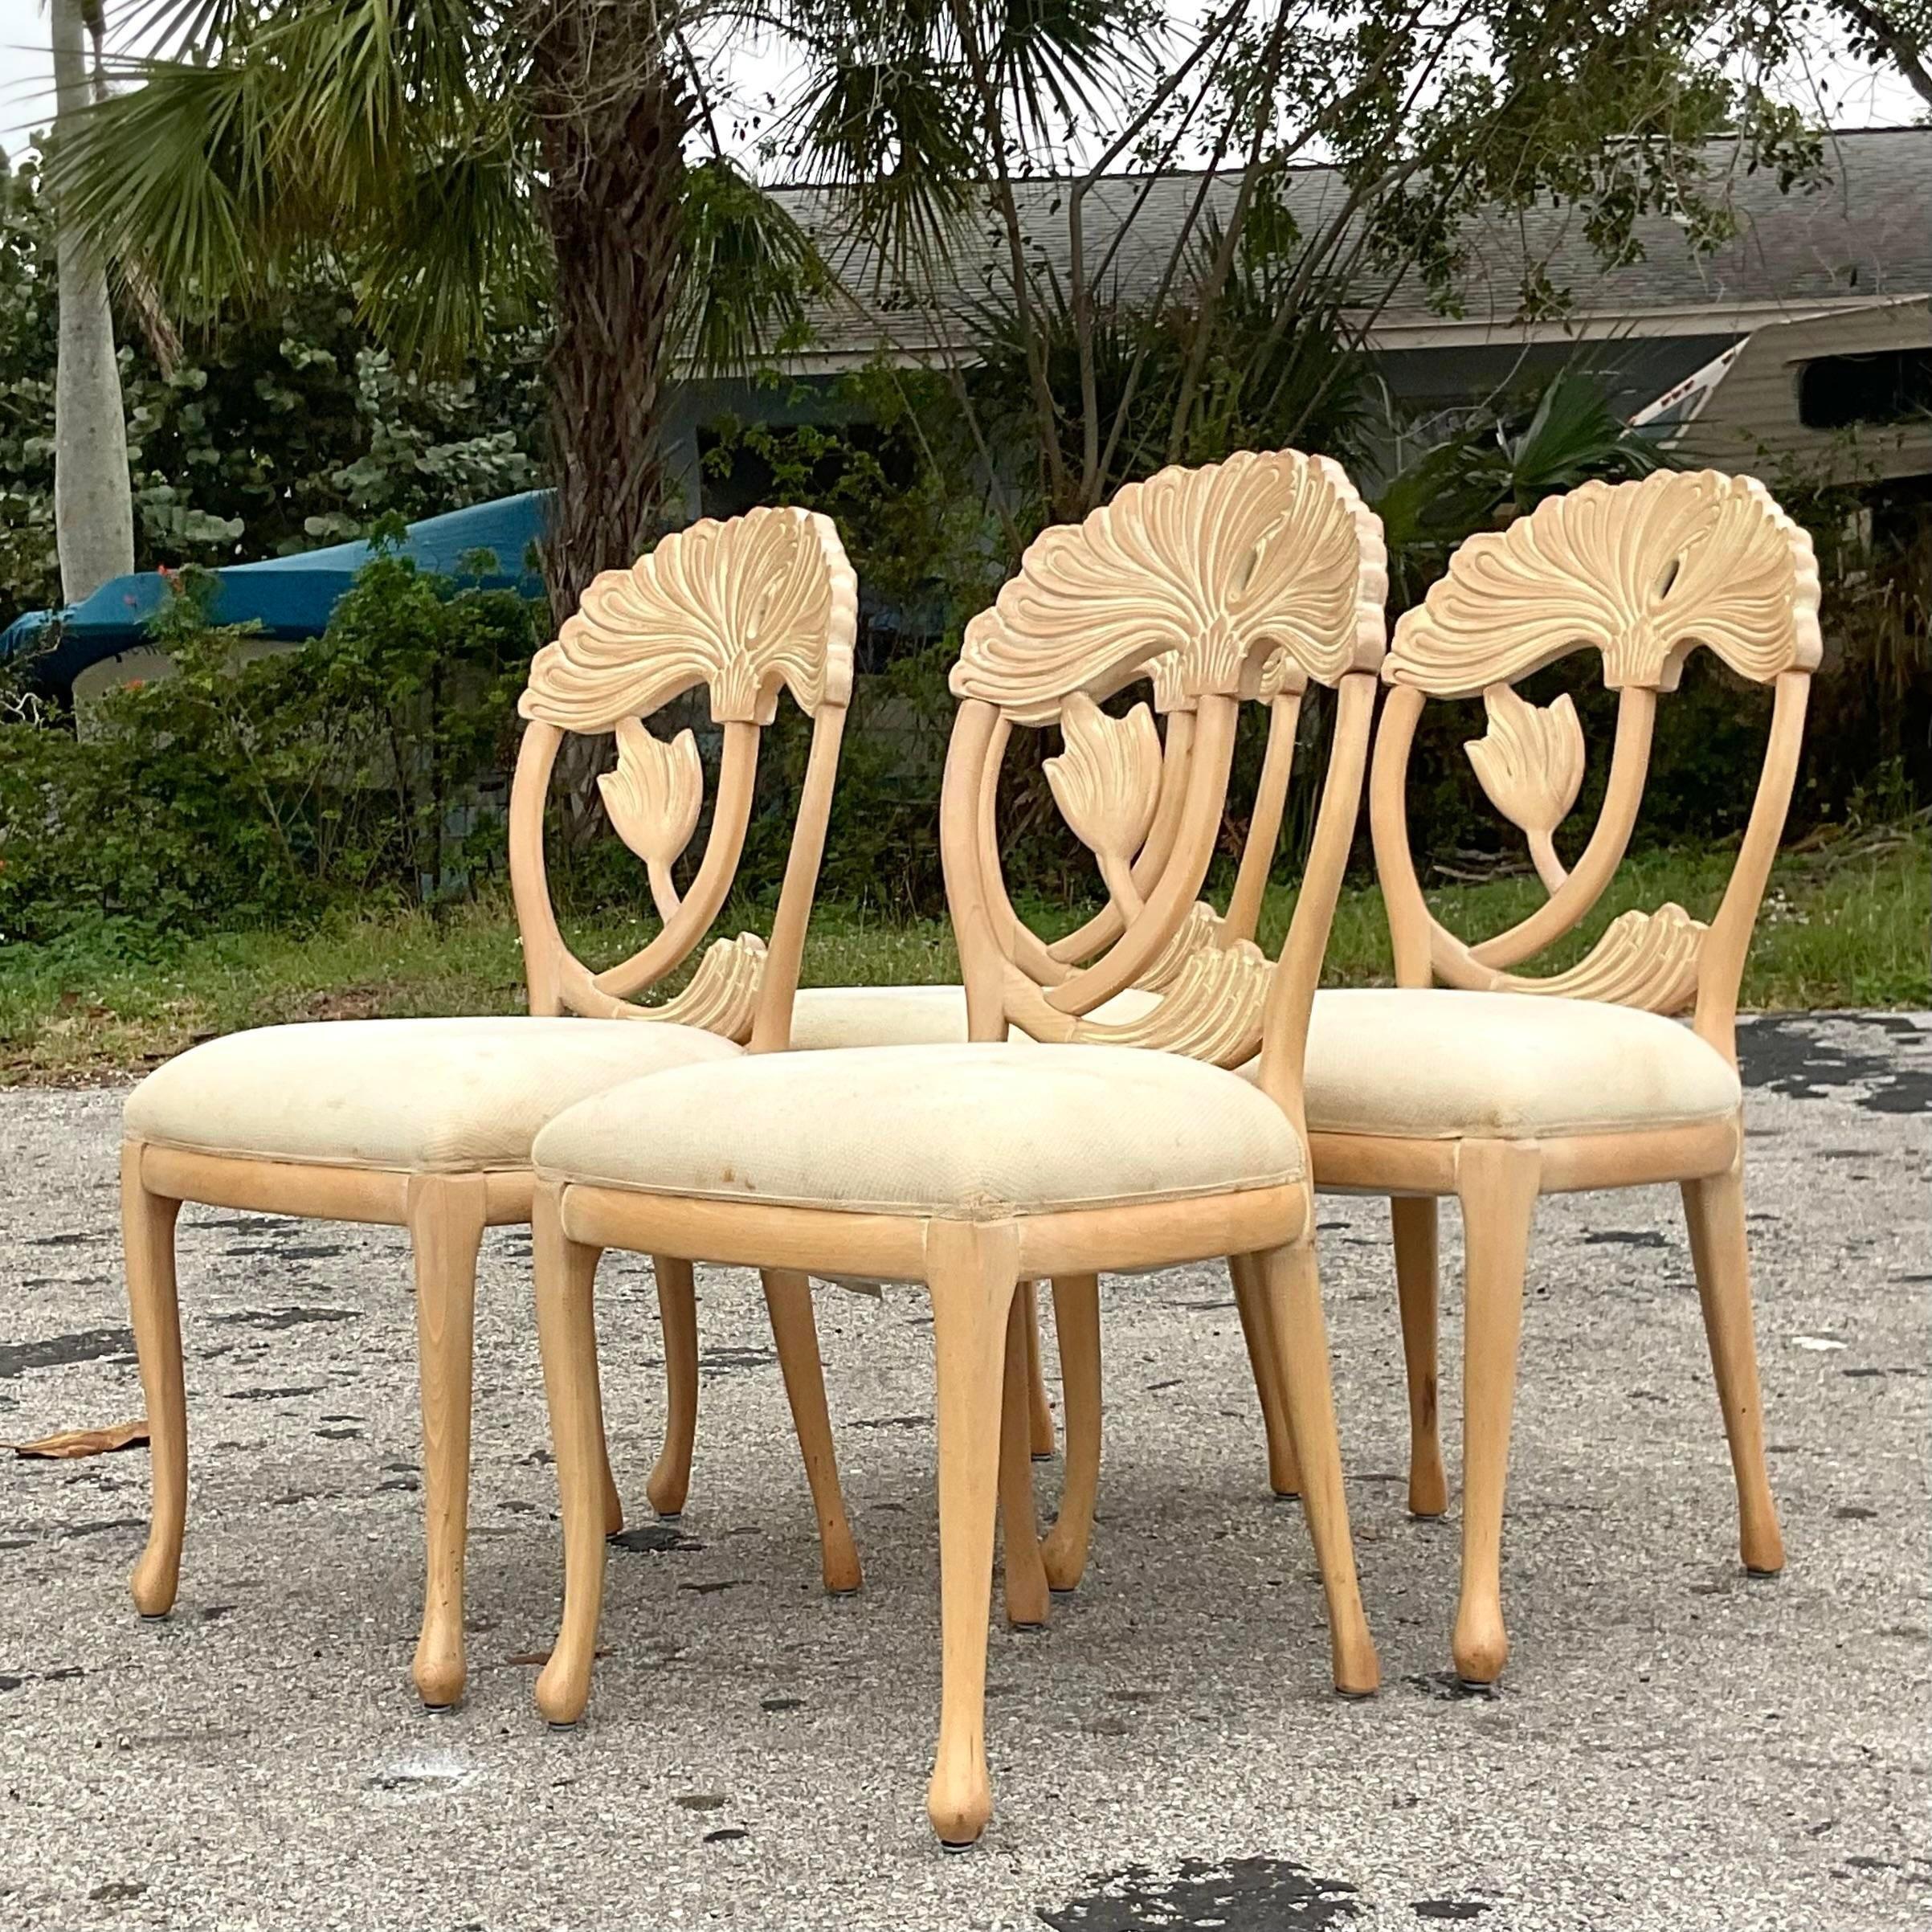 A fabulous vintage Coastal dining table pedestal. A chic carved lily design in a washed finish. Matching chairs also available on my page. Acquired from a Palm Beach estate.